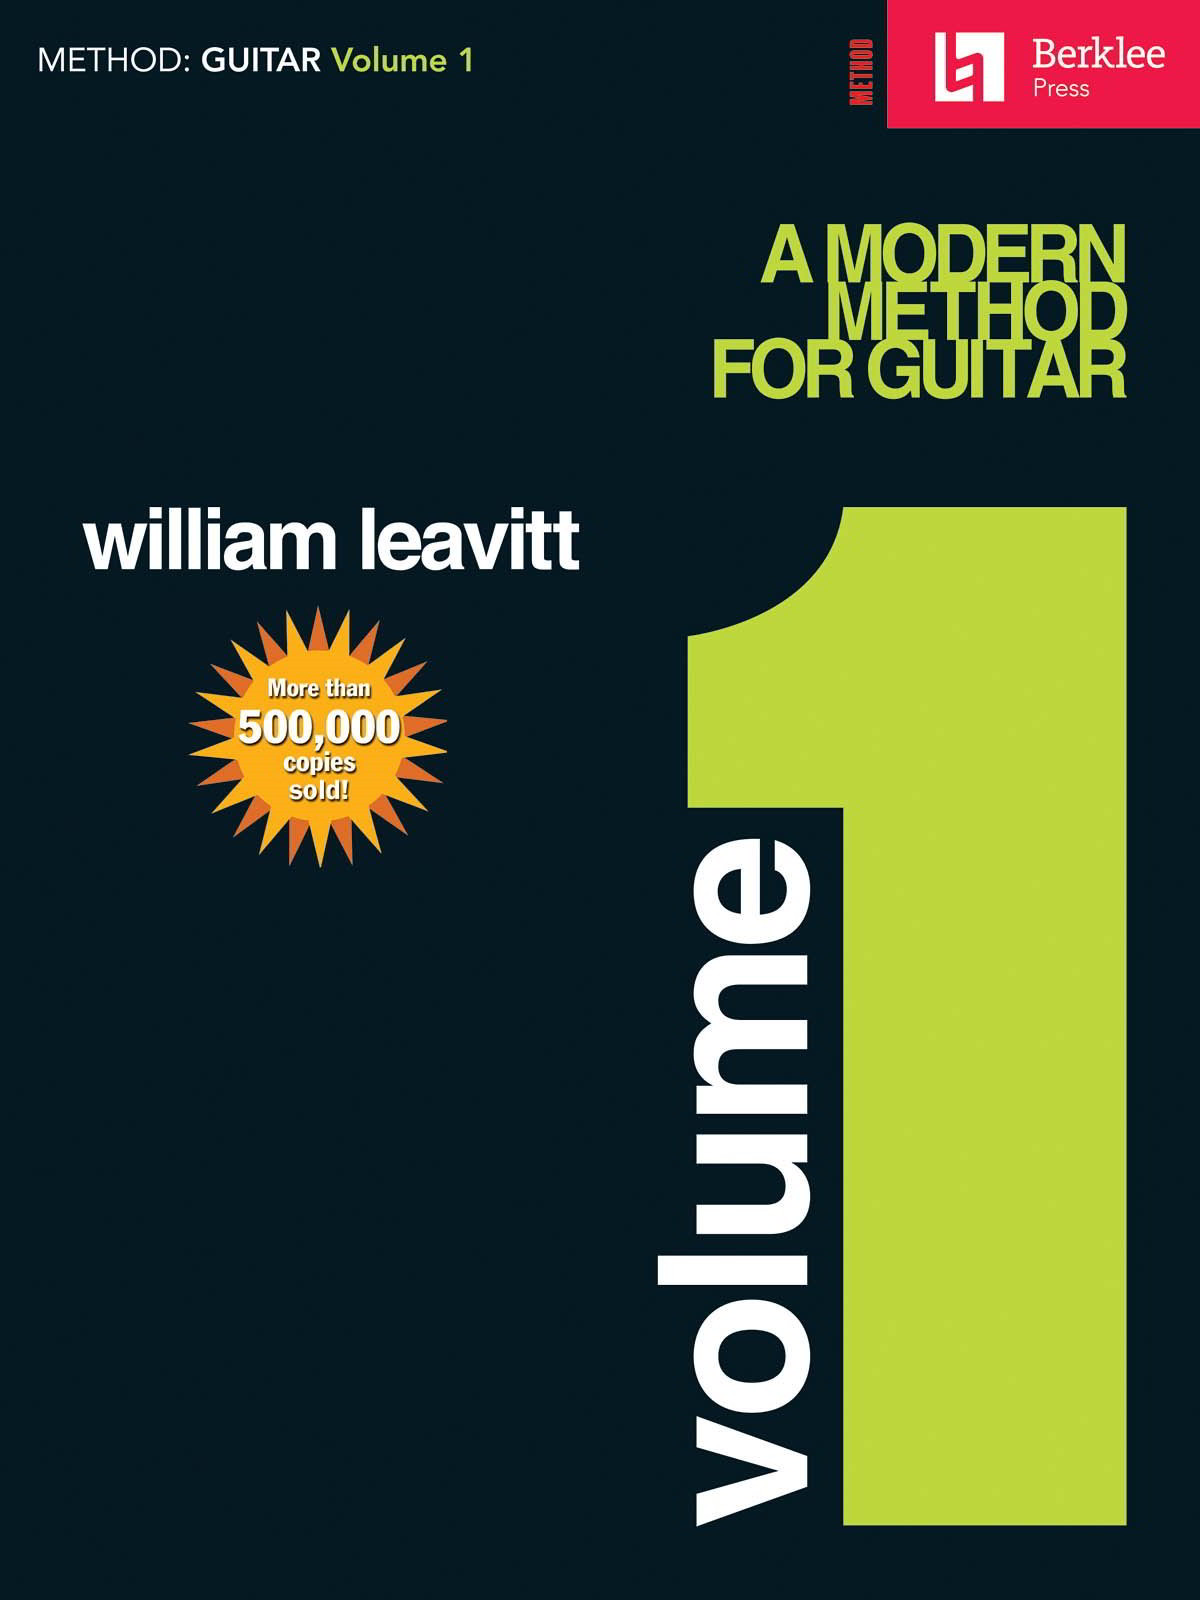 A Modern Method For Guitar: Volume 1 published by Berklee (Book Only)